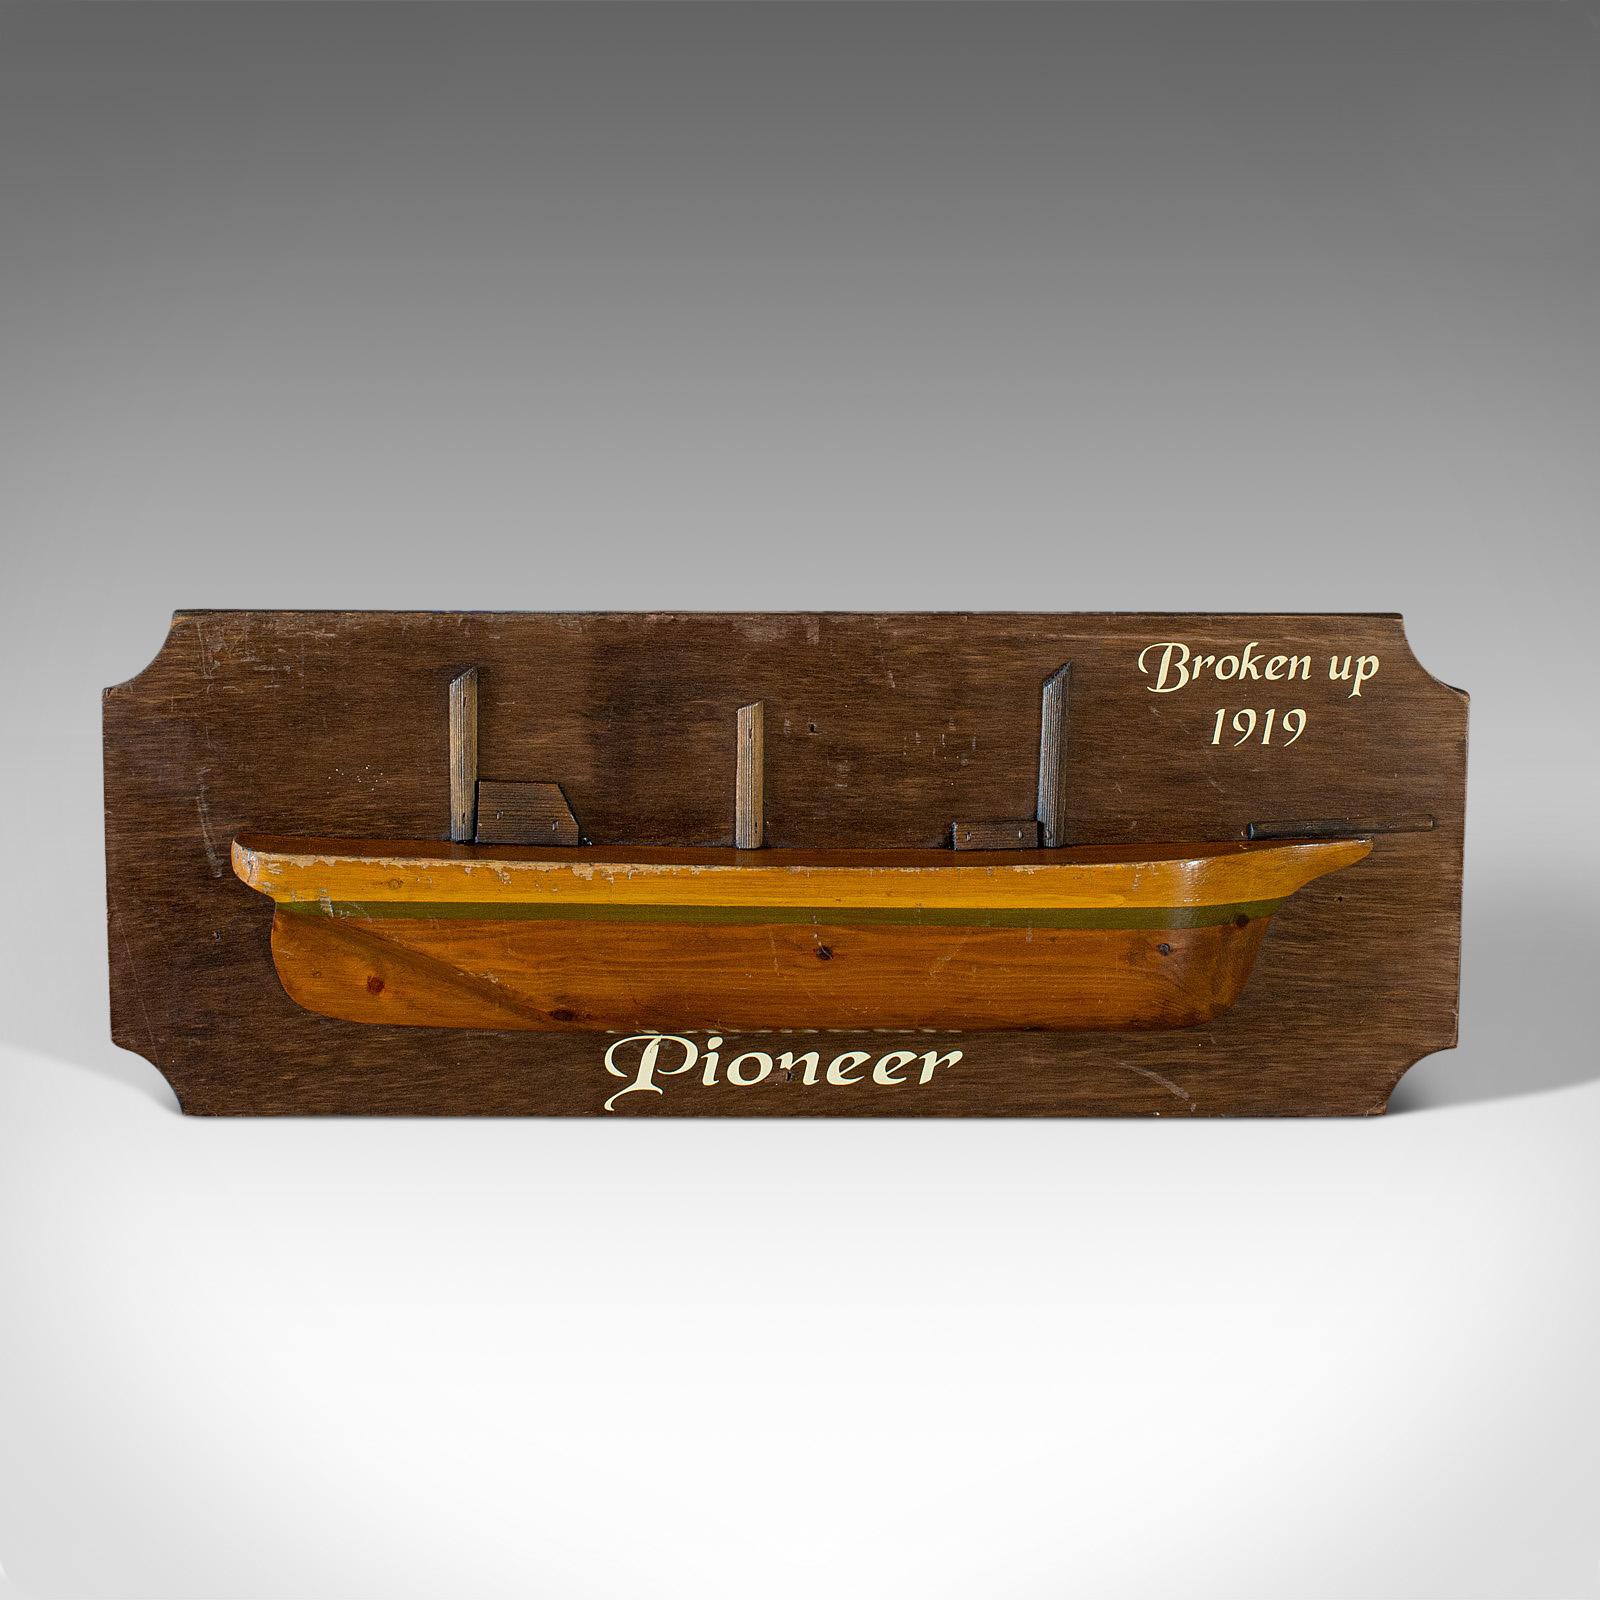 This is a vintage nautical half hull. An English, pine decorative ship model, dating to the early 20th century, circa 1930.

A charming example of a half hull model
Displays a desirable patina
Pine shows fine grain interest
Presented with the